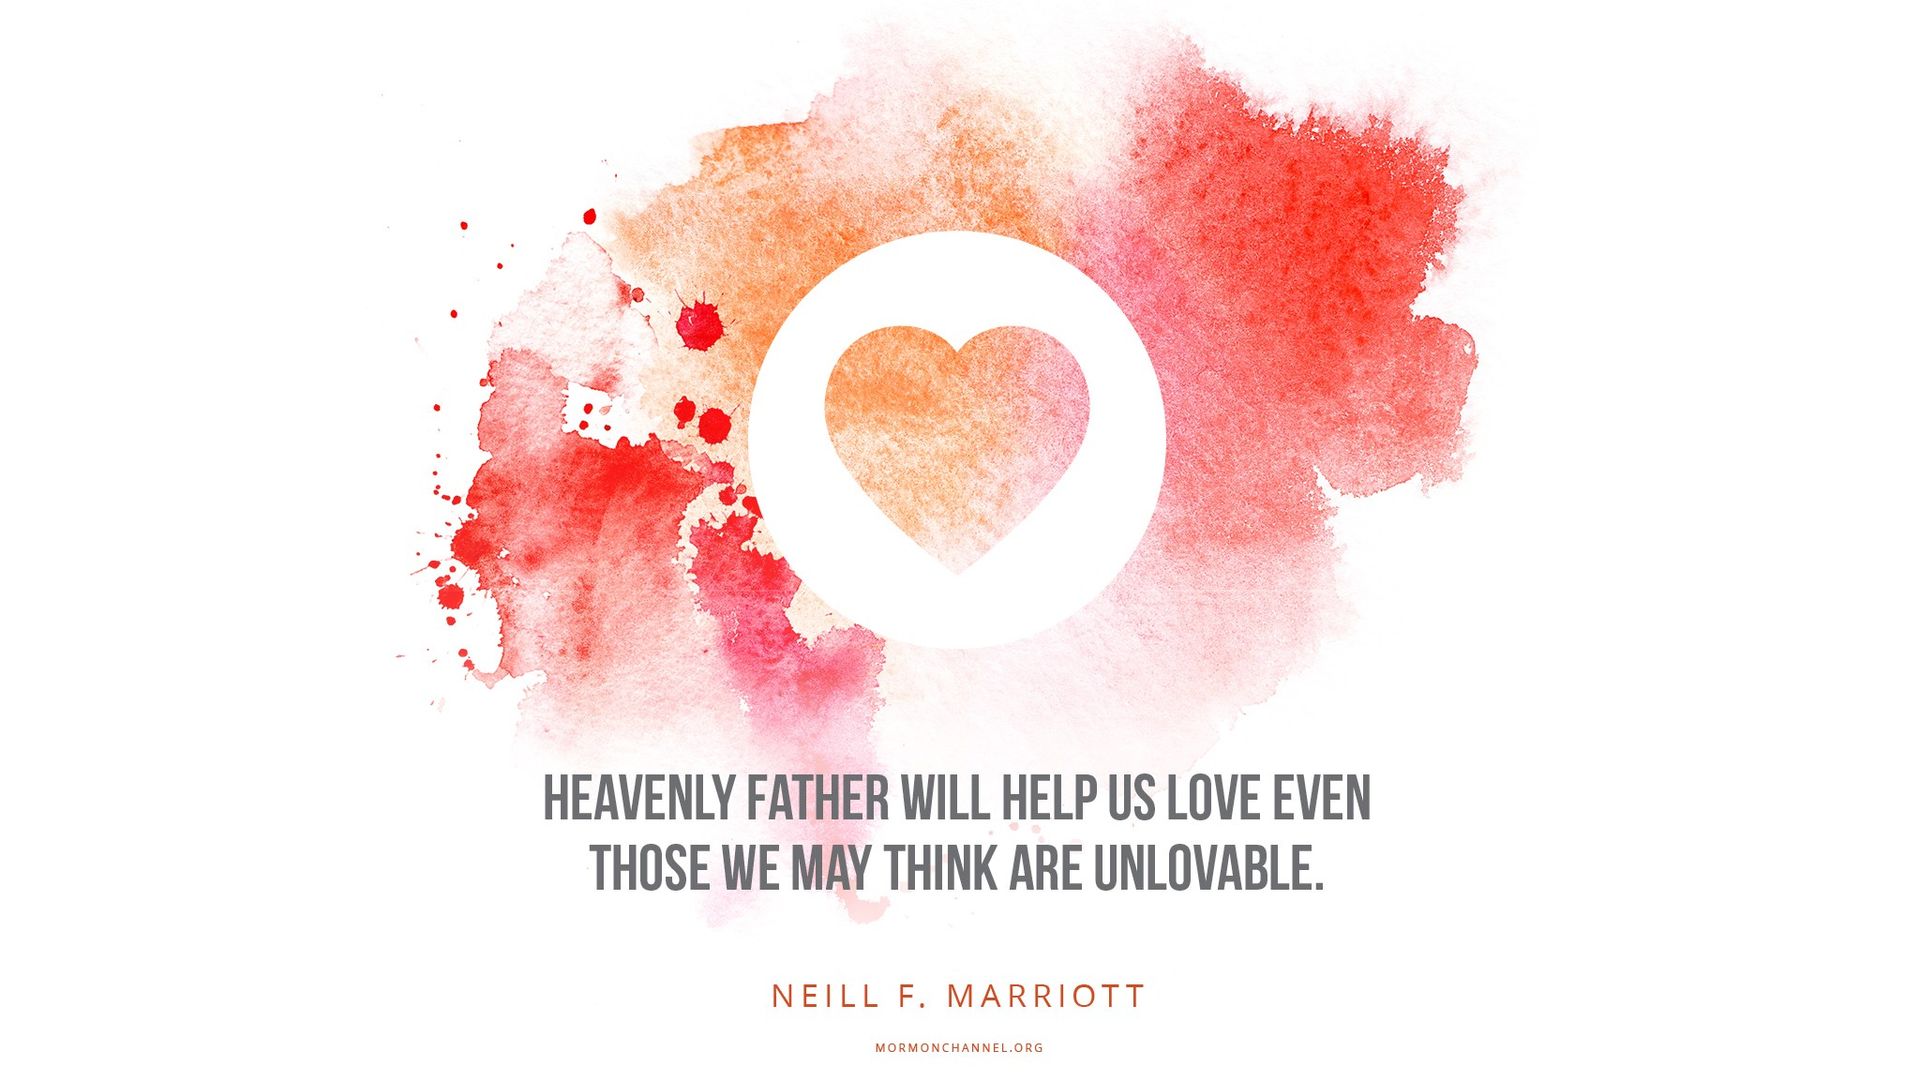 “Heavenly Father will help us love even those we may think are unlovable.”—Sister Neill F. Marriott, “Abiding in God and Repairing the Breach” © undefined ipCode 1.